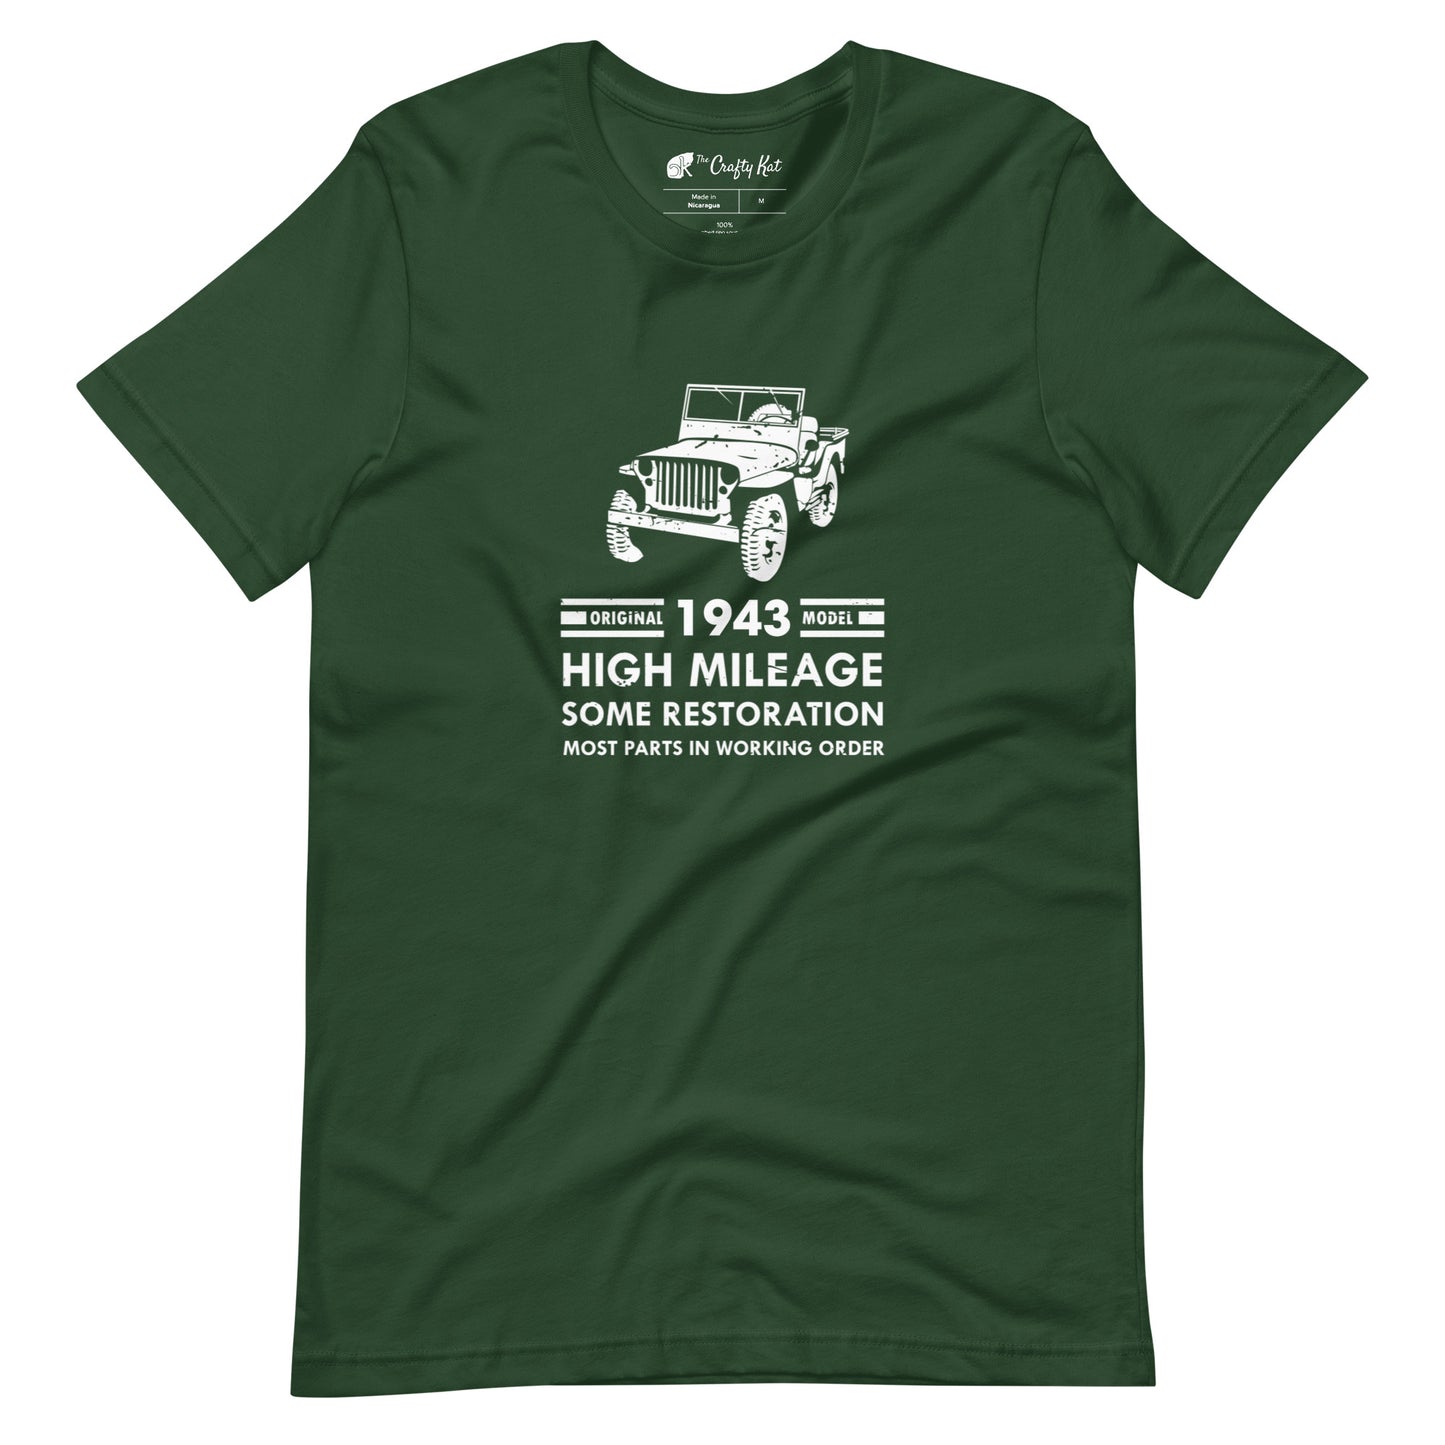 Forest green t-shirt with distressed graphic of old military jeep and text "Original YEAR model HIGH MILEAGE some restoration MOST PARTS IN WORKING ORDER"